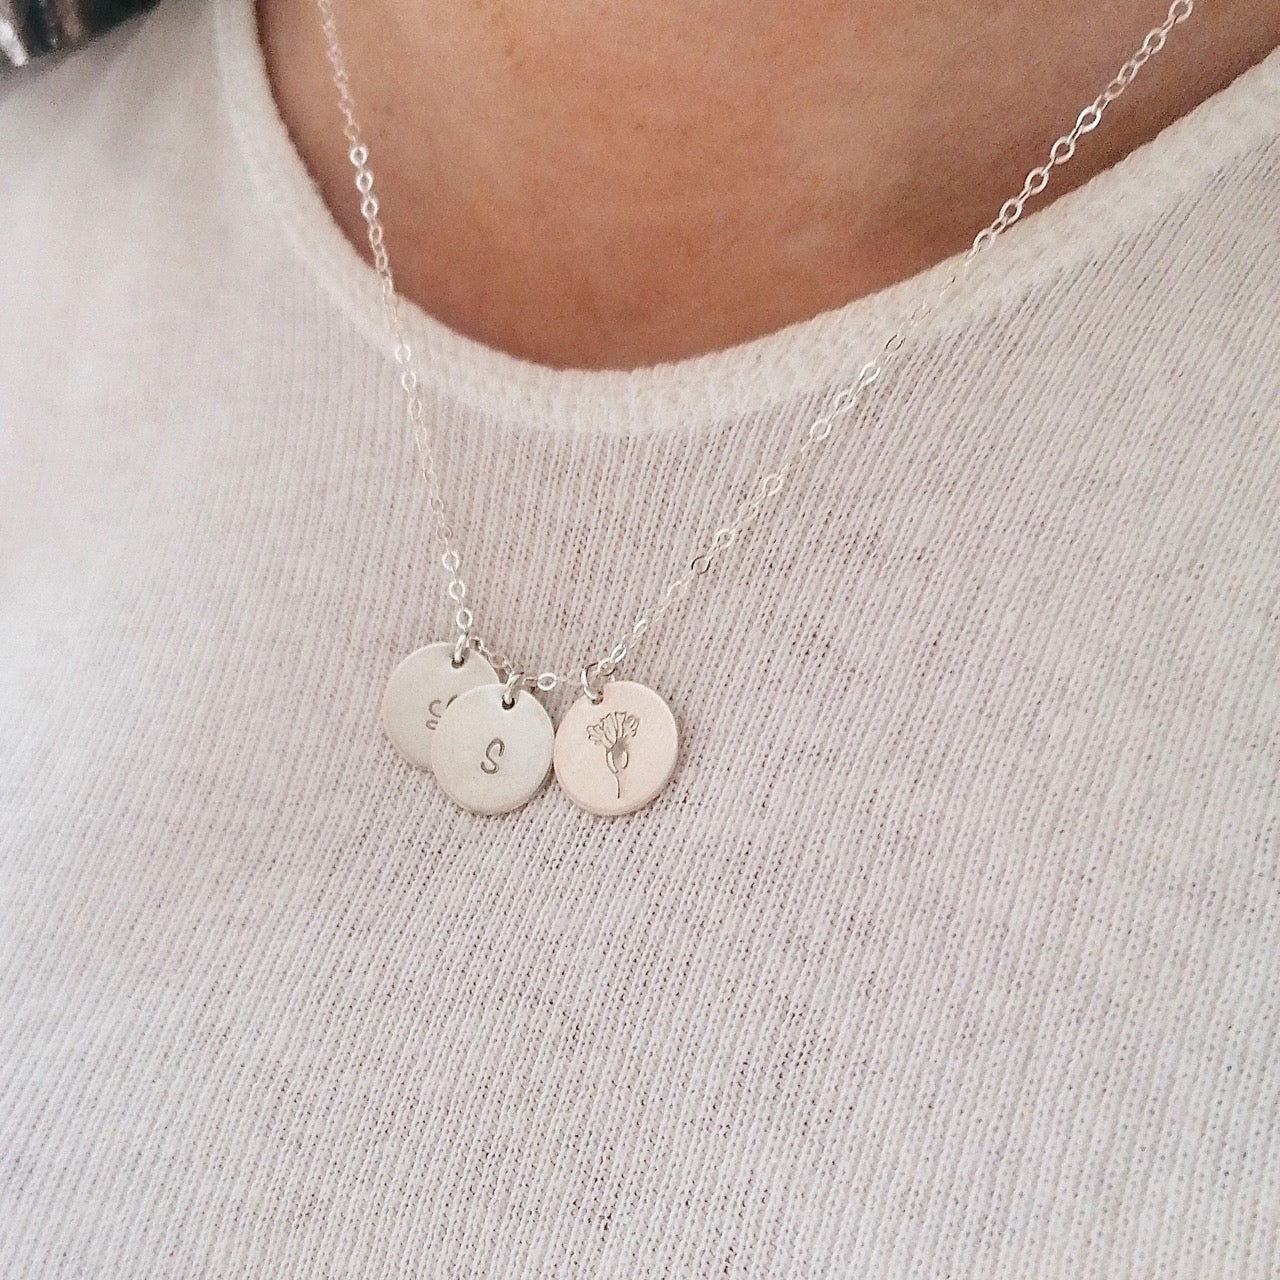 personalised silver necklace with 3 discs